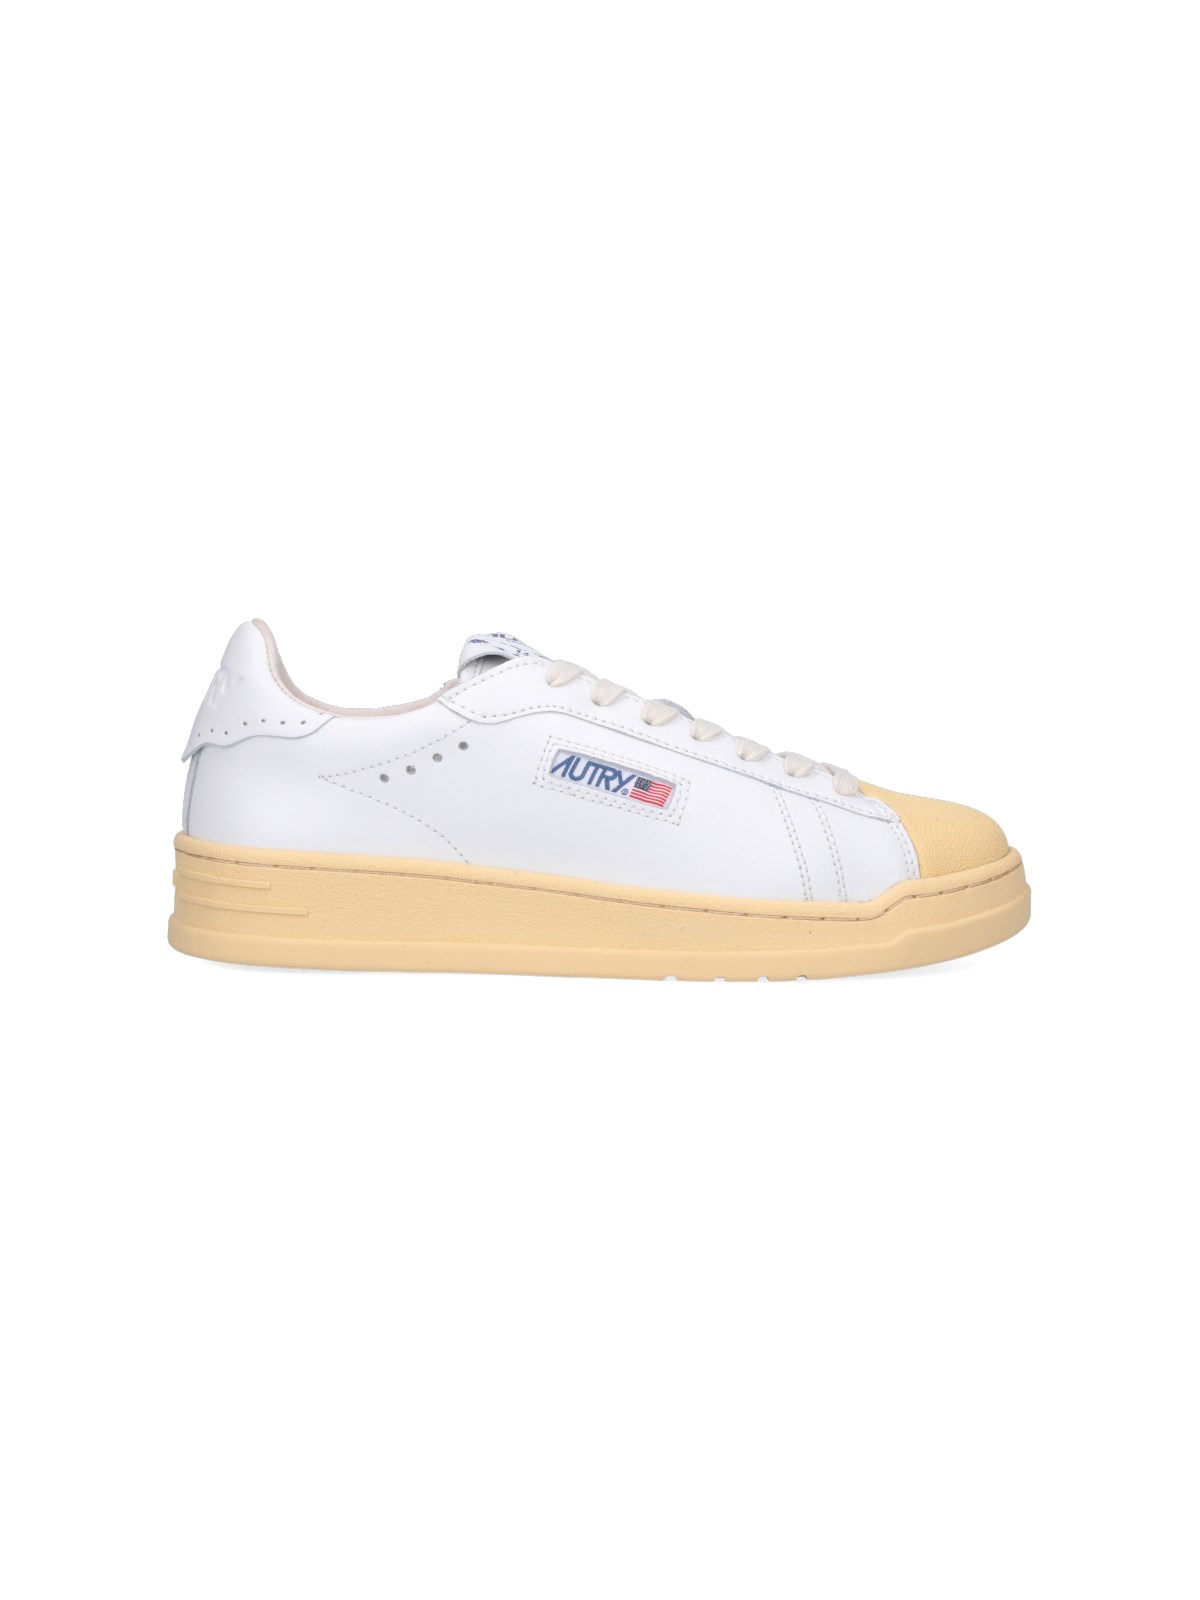 Shop Autry Sneakers "bob Lutz" In White